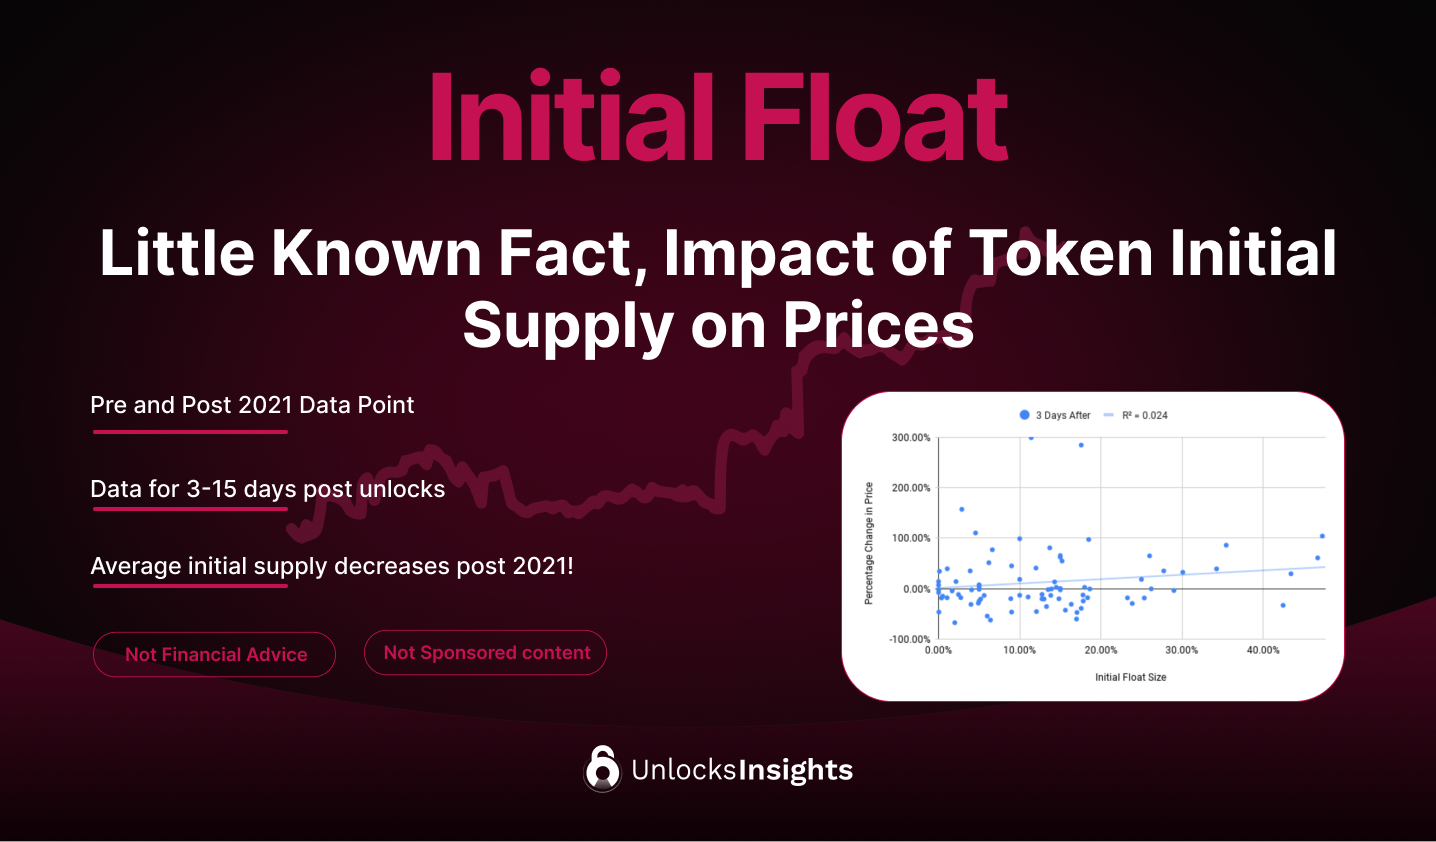 Little Known Fact, Impact of Token Initial Supply on Prices